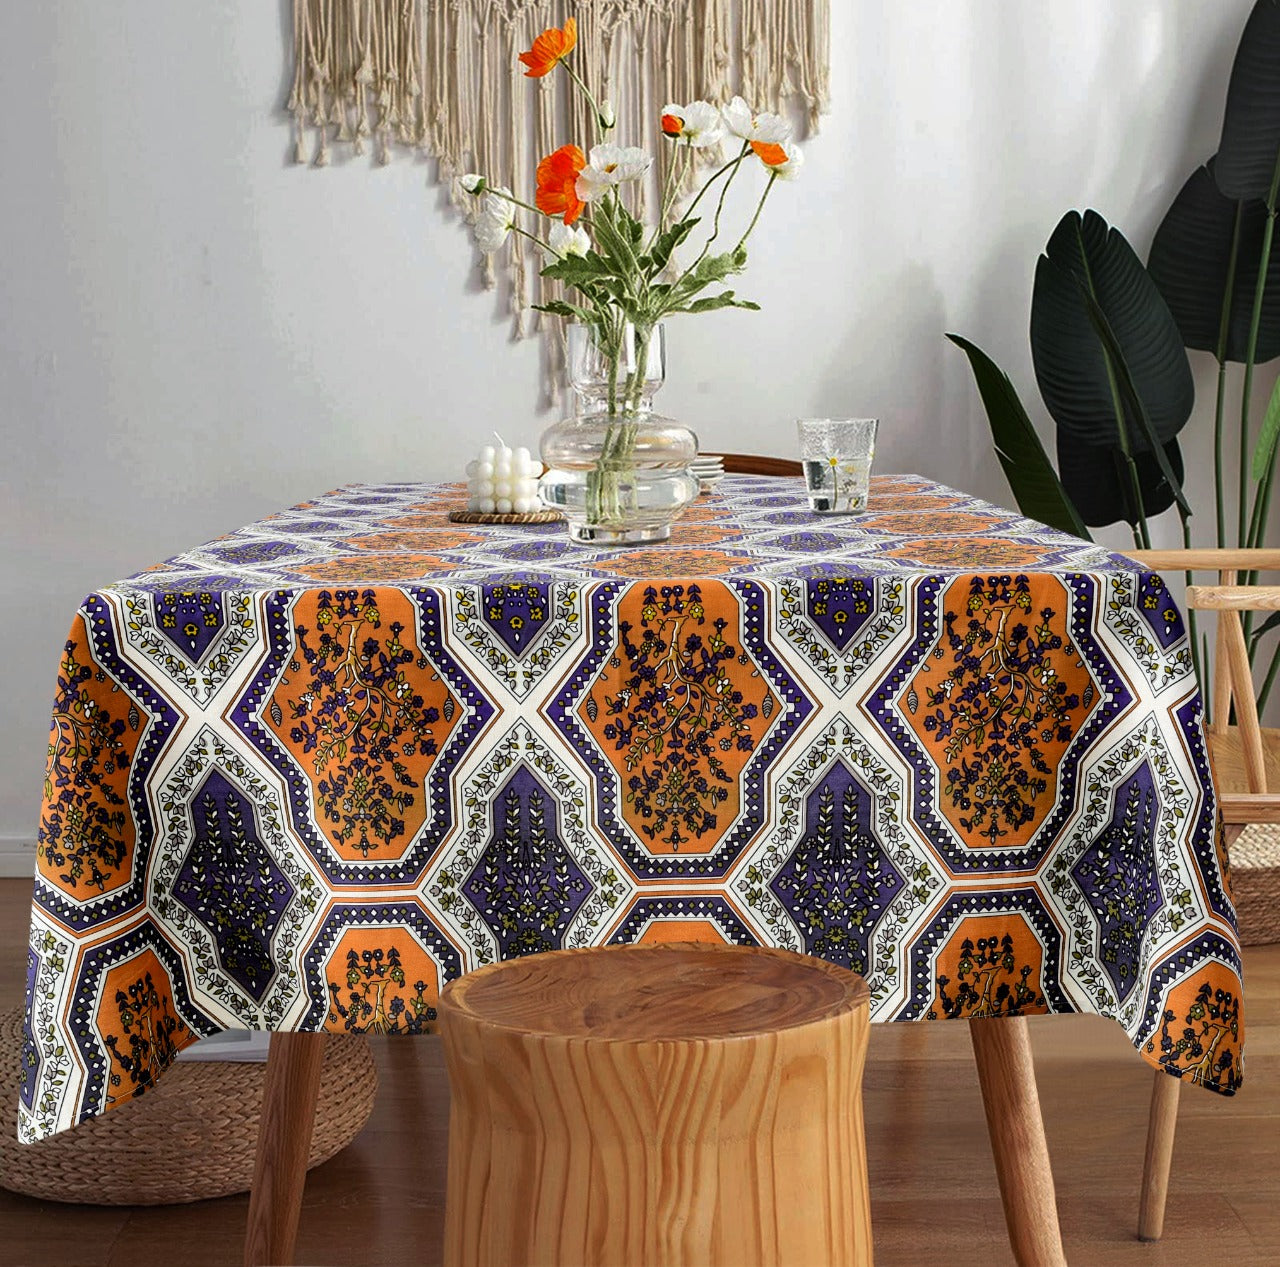 6 & 8 Seater Digital Printed Table Cover(4534)-TB32 Apricot